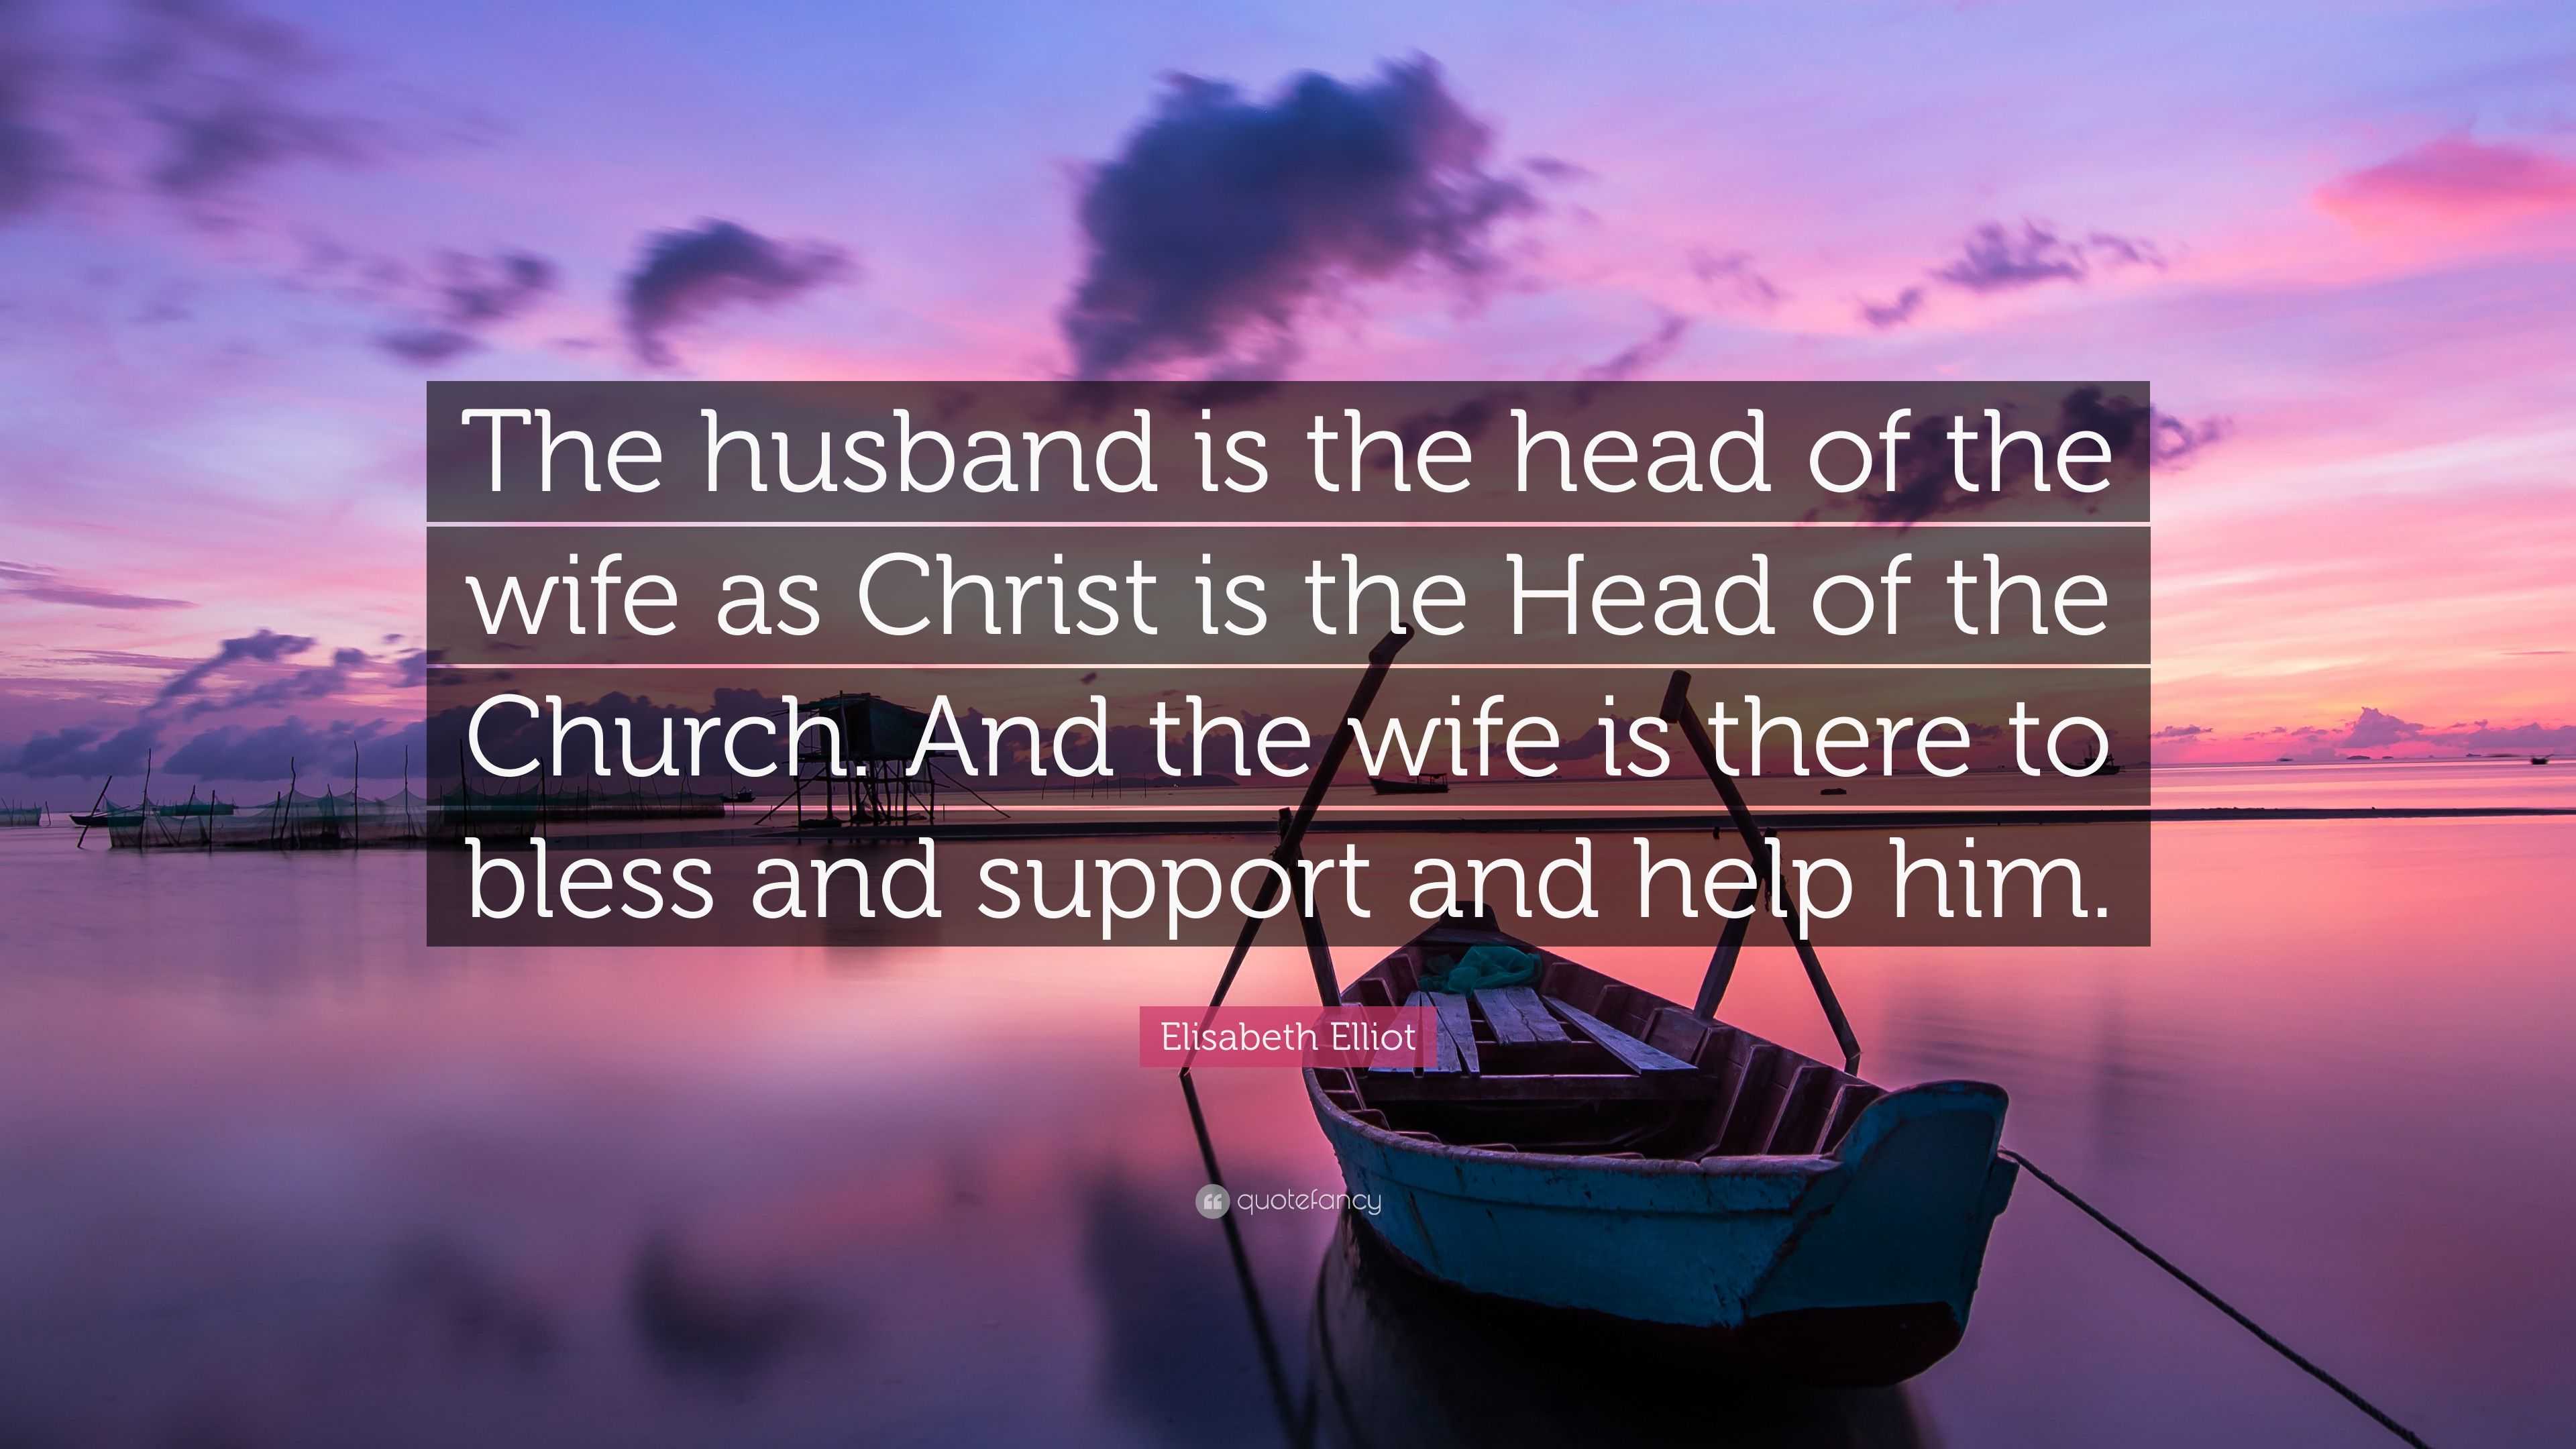 Elisabeth Elliot Quote: "The husband is the head of the ...